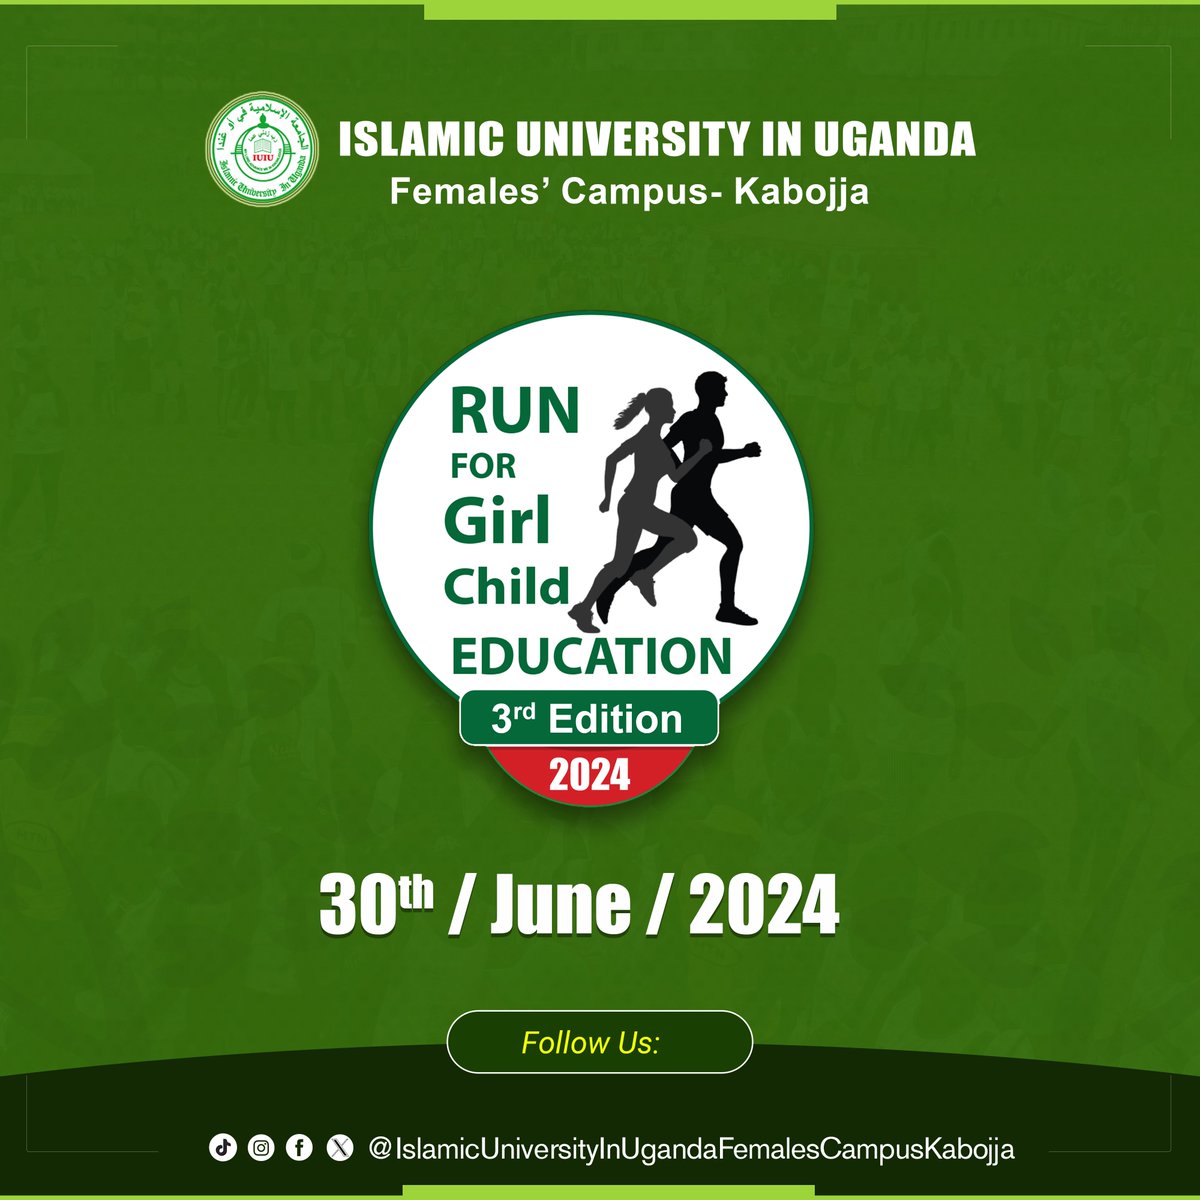 Now that the #KabakaBirthdayRun2024 is over, mark your calendars for June 30th, 2024, and join the Hajjats at @iufckabojja for this year’s Miles for Smiles: Supporting Girls’ Education. #Run4GirlChild